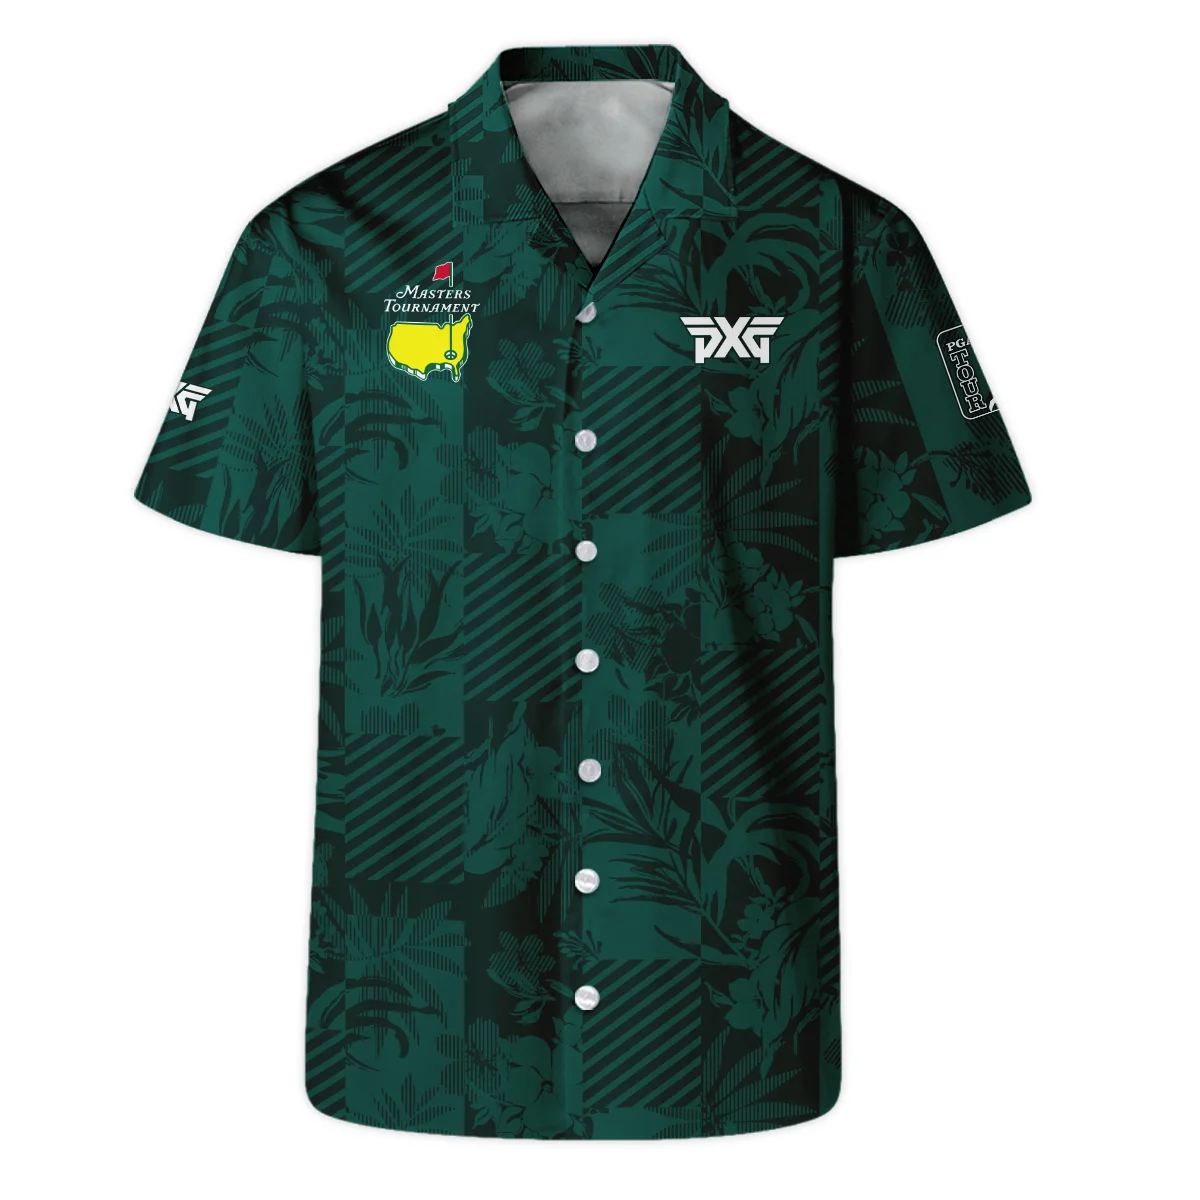 Tropical Leaves ,Foliage With Geometric Stripe Pattern Golf Masters Tournament Polo Shirt Style Classic Polo Shirt For Men